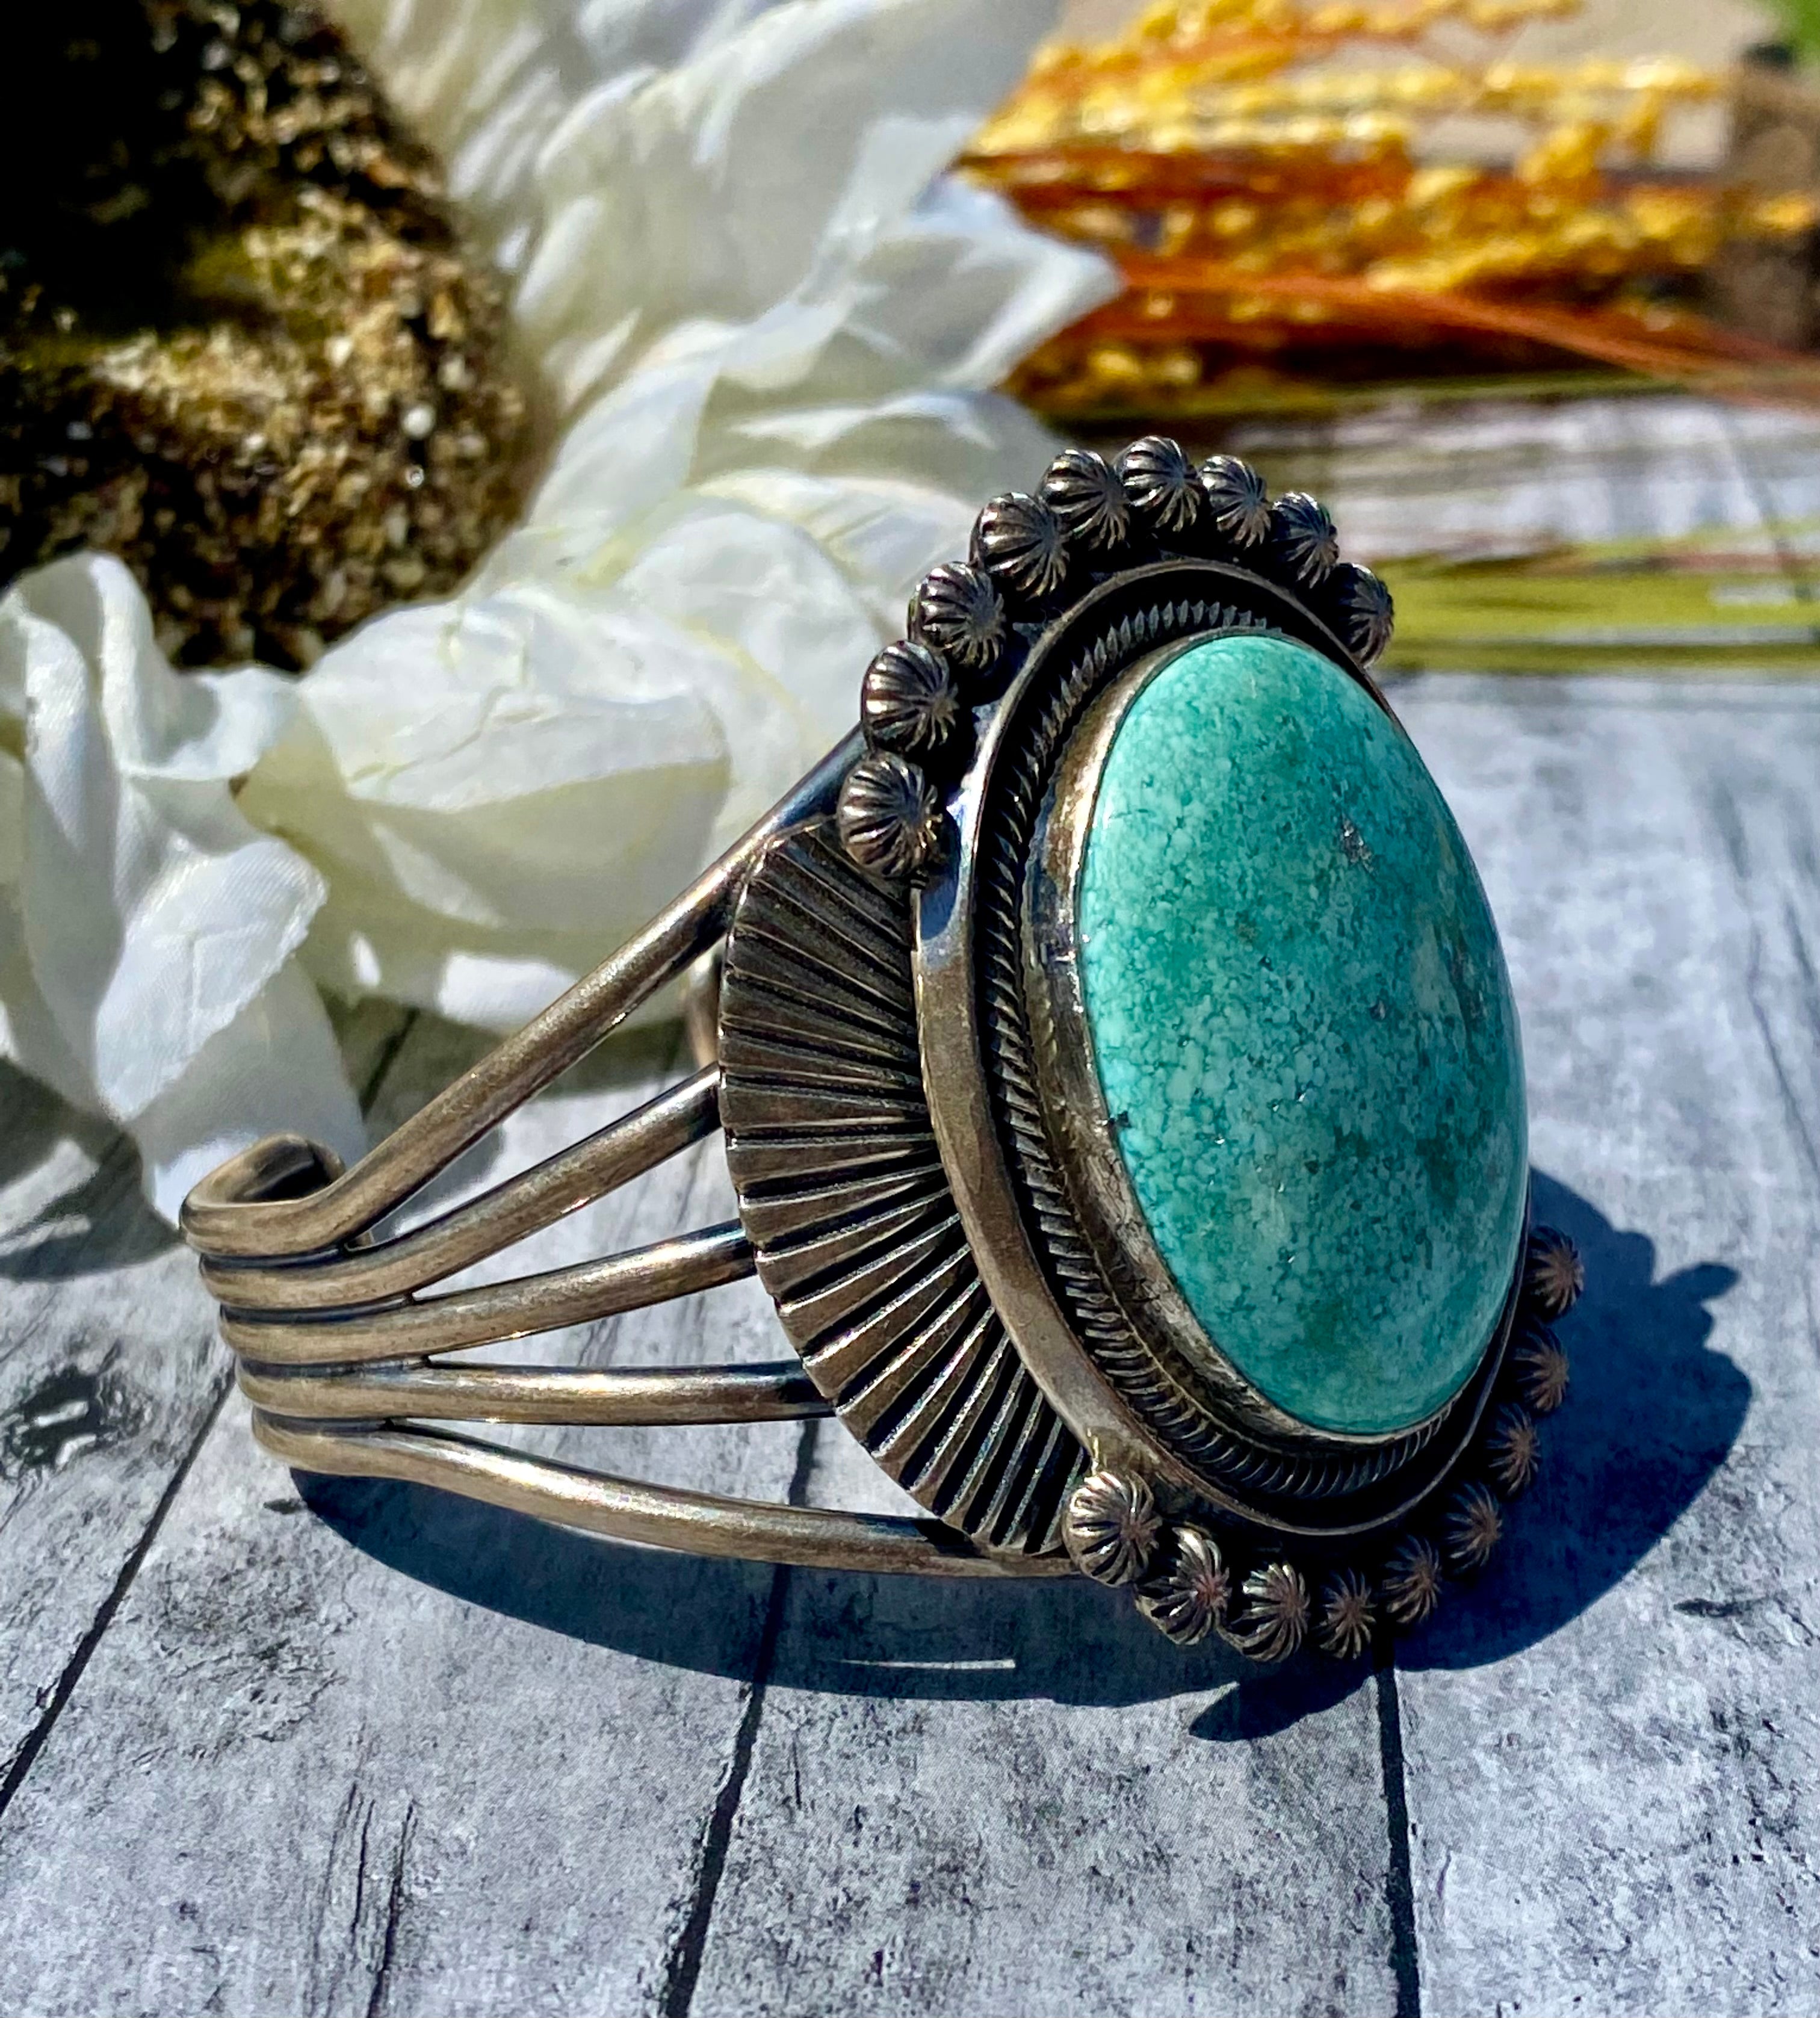 Leon M.T.Z. Navajo Made Carico Lake Turquoise & Sterling Silver Cuff Bracelet